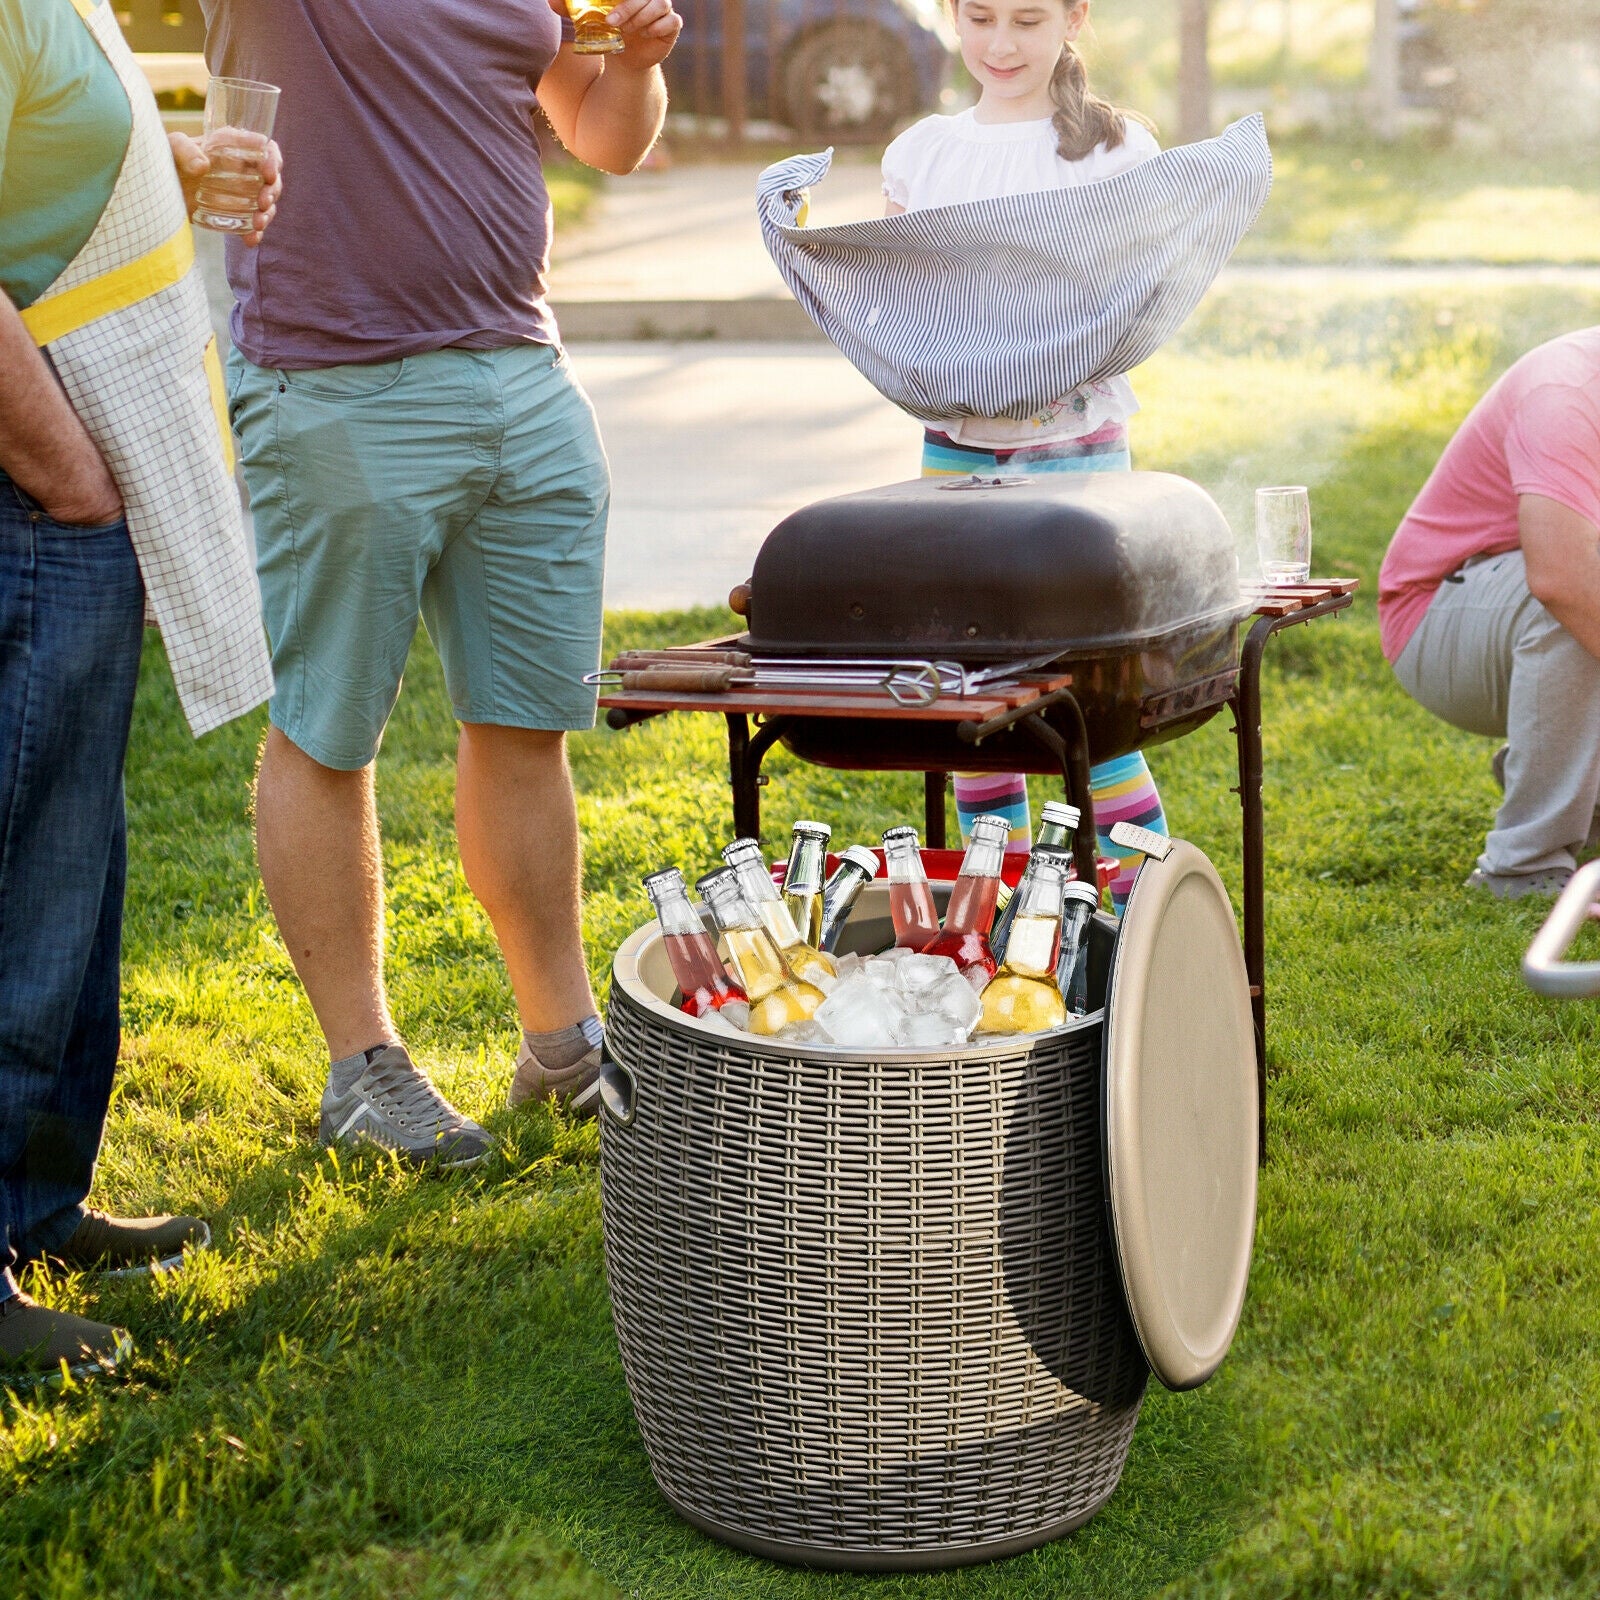 Elegant Wicker Design: The ice cooler features an exquisite imitation rattan style that adds a touch of elegance to any outdoor activity, such as pool parties, barbecues, or family gatherings. It perfectly complements your patio rattan conversation set, combining functionality and aesthetic appeal.